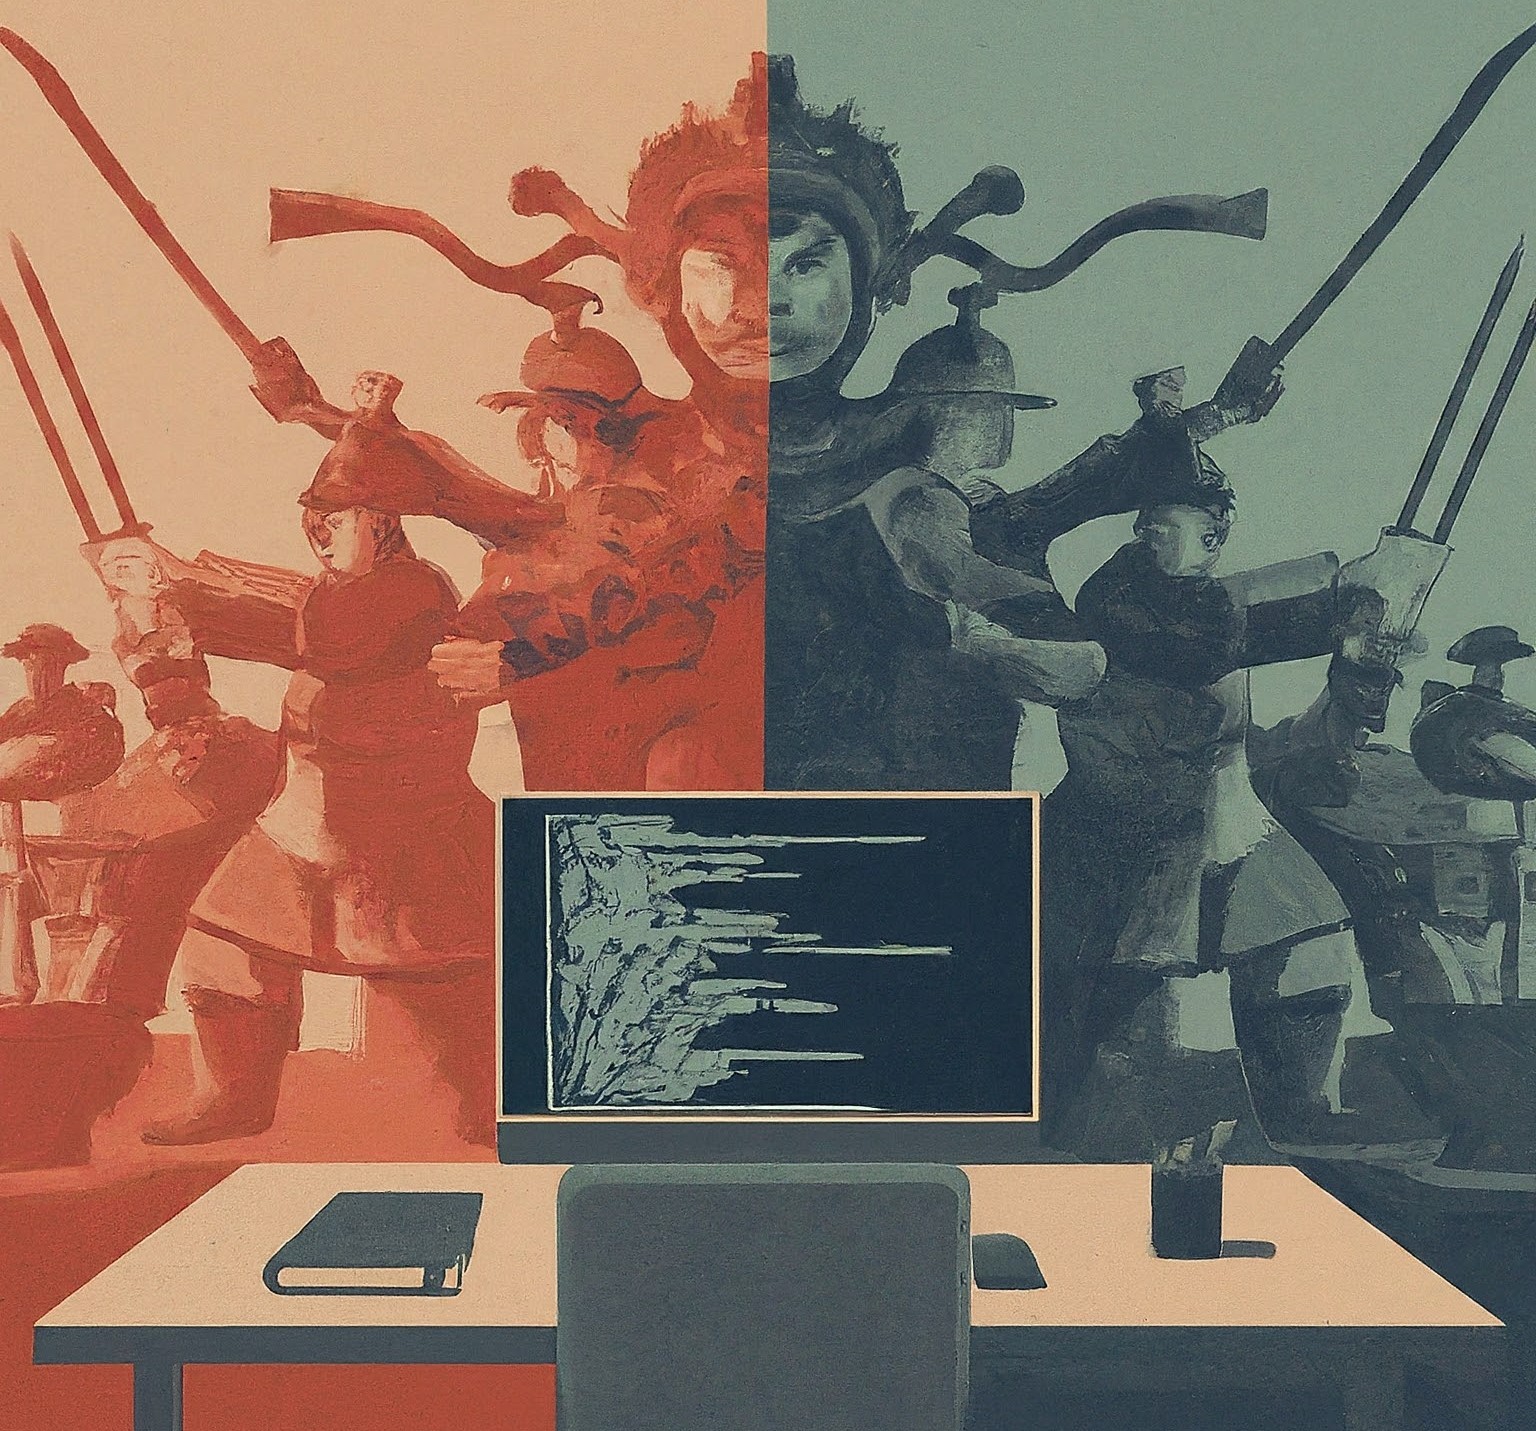 Building Your Dev Army: Forge a Software Empire with Sun Tzu’s Wisdom #4